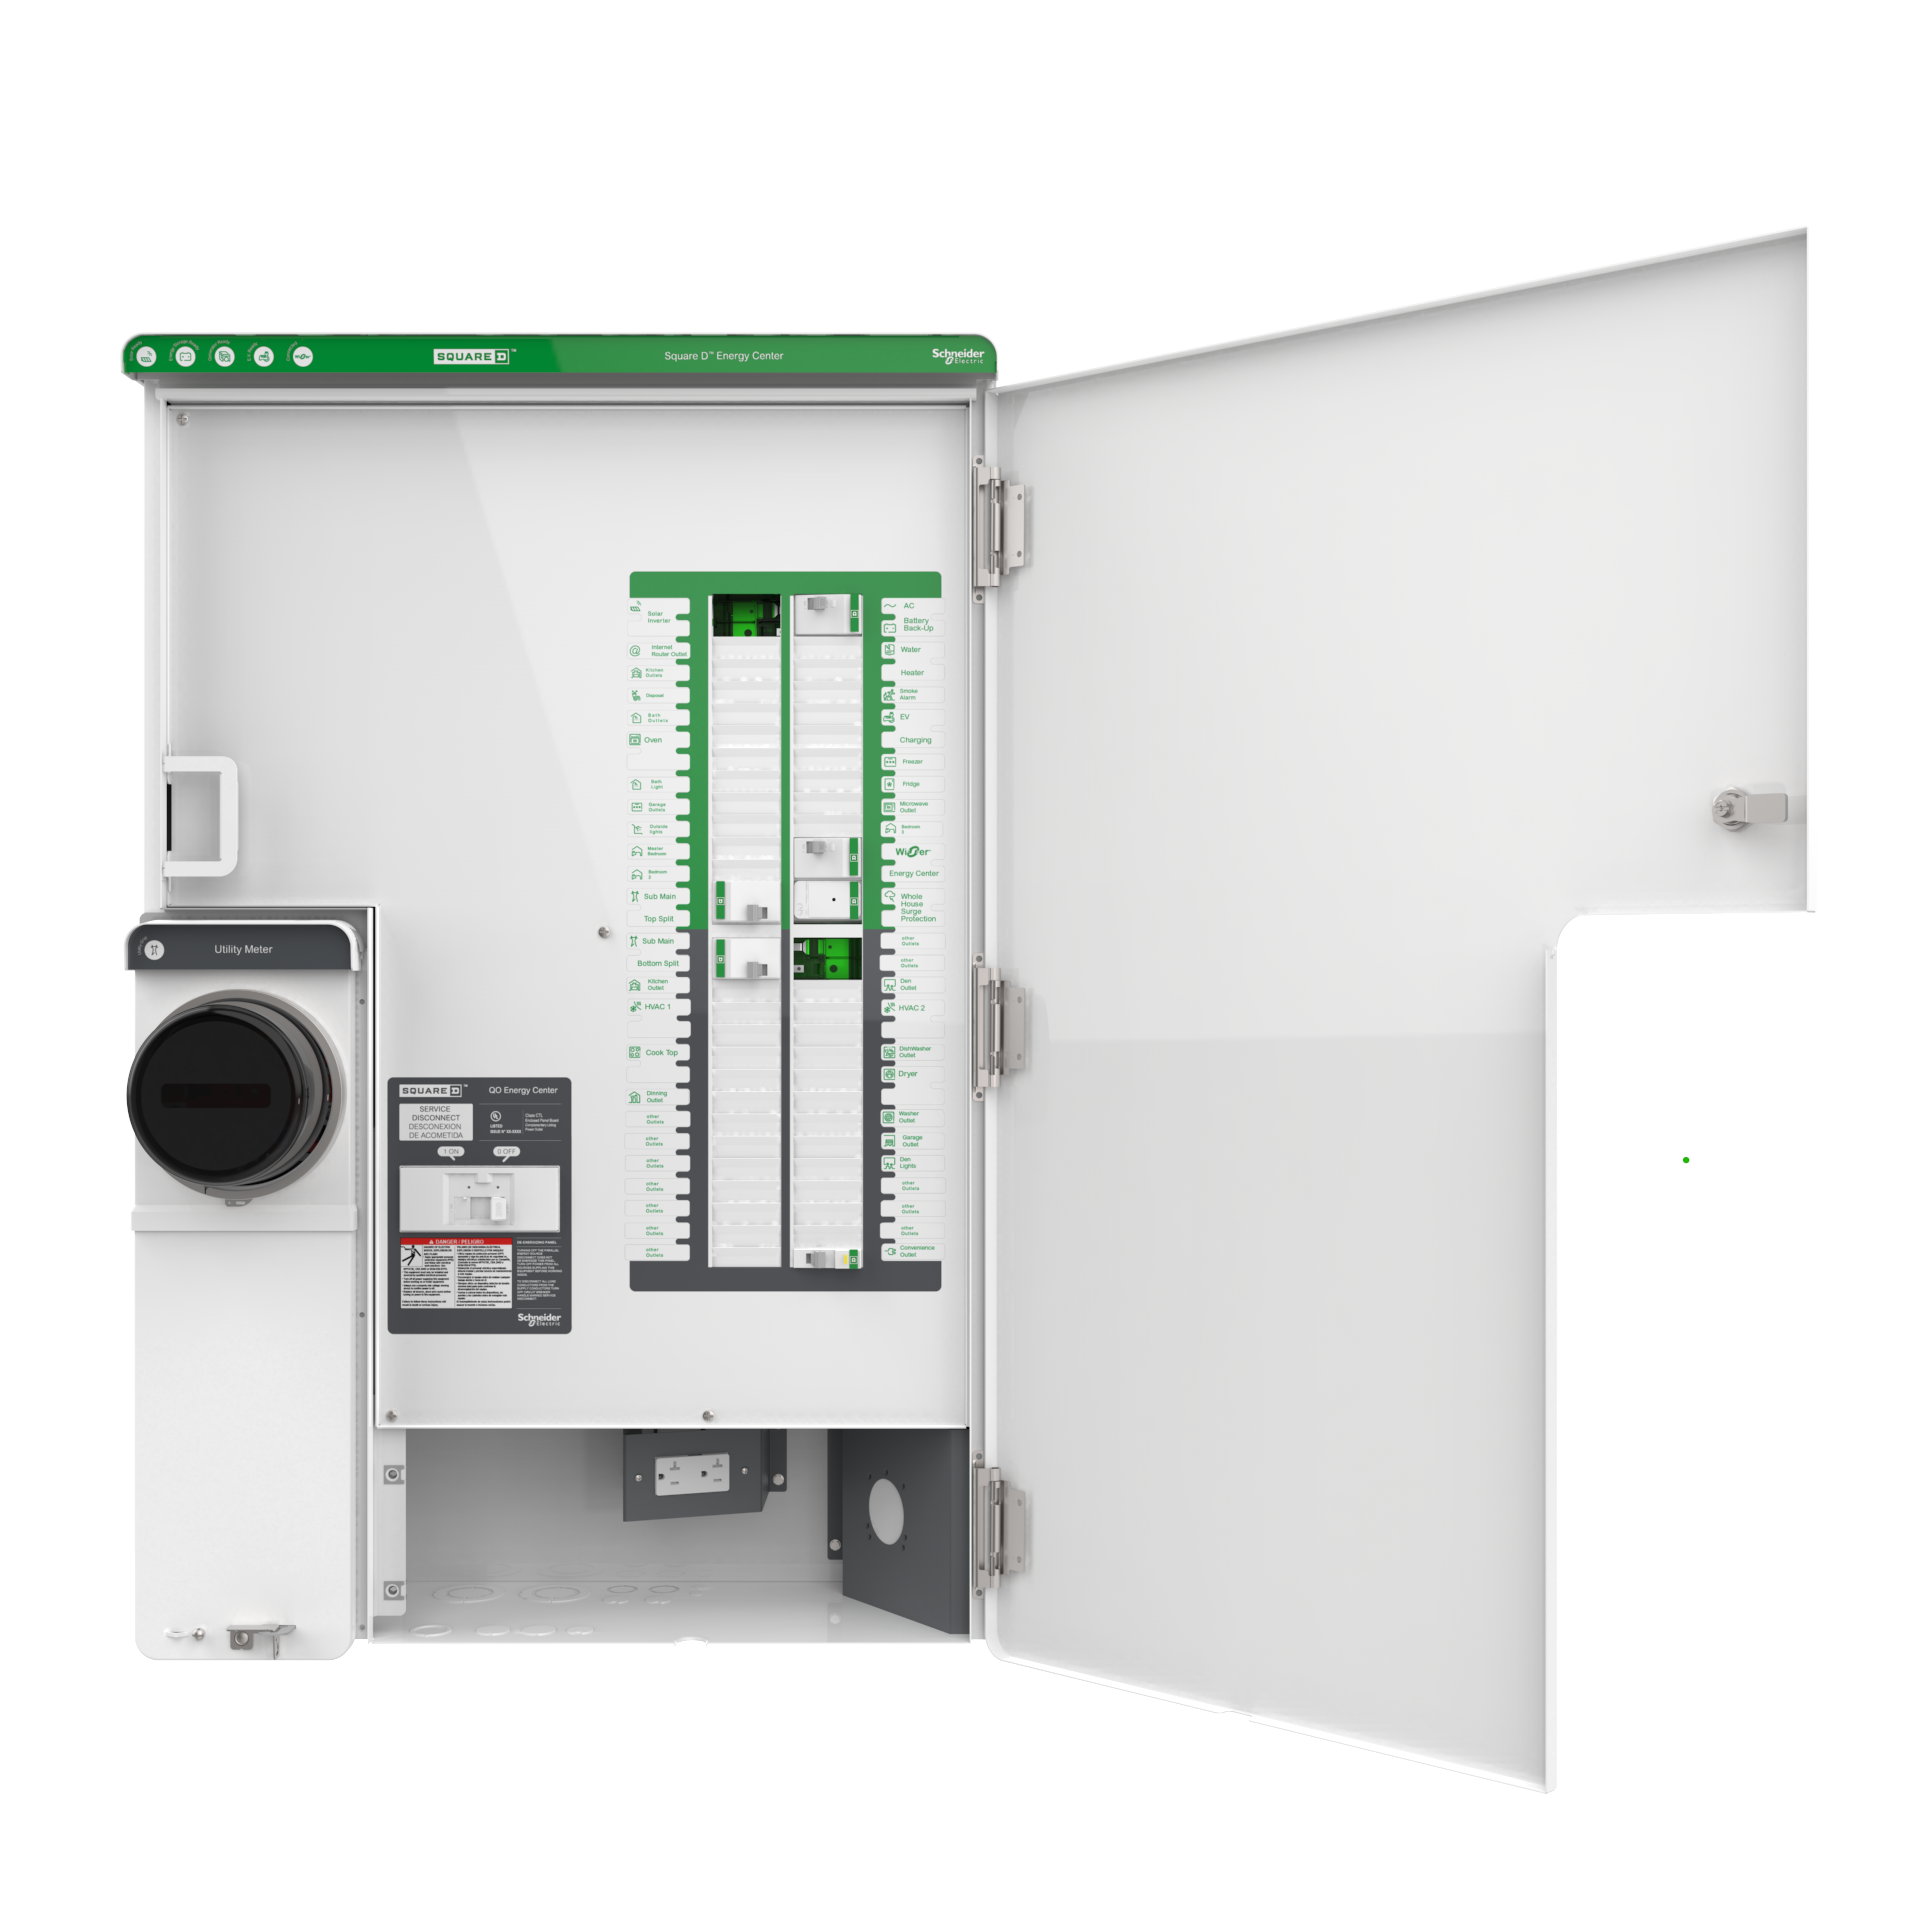 Schneider Electric Wiser Energy System Tracks Your Home's Usage